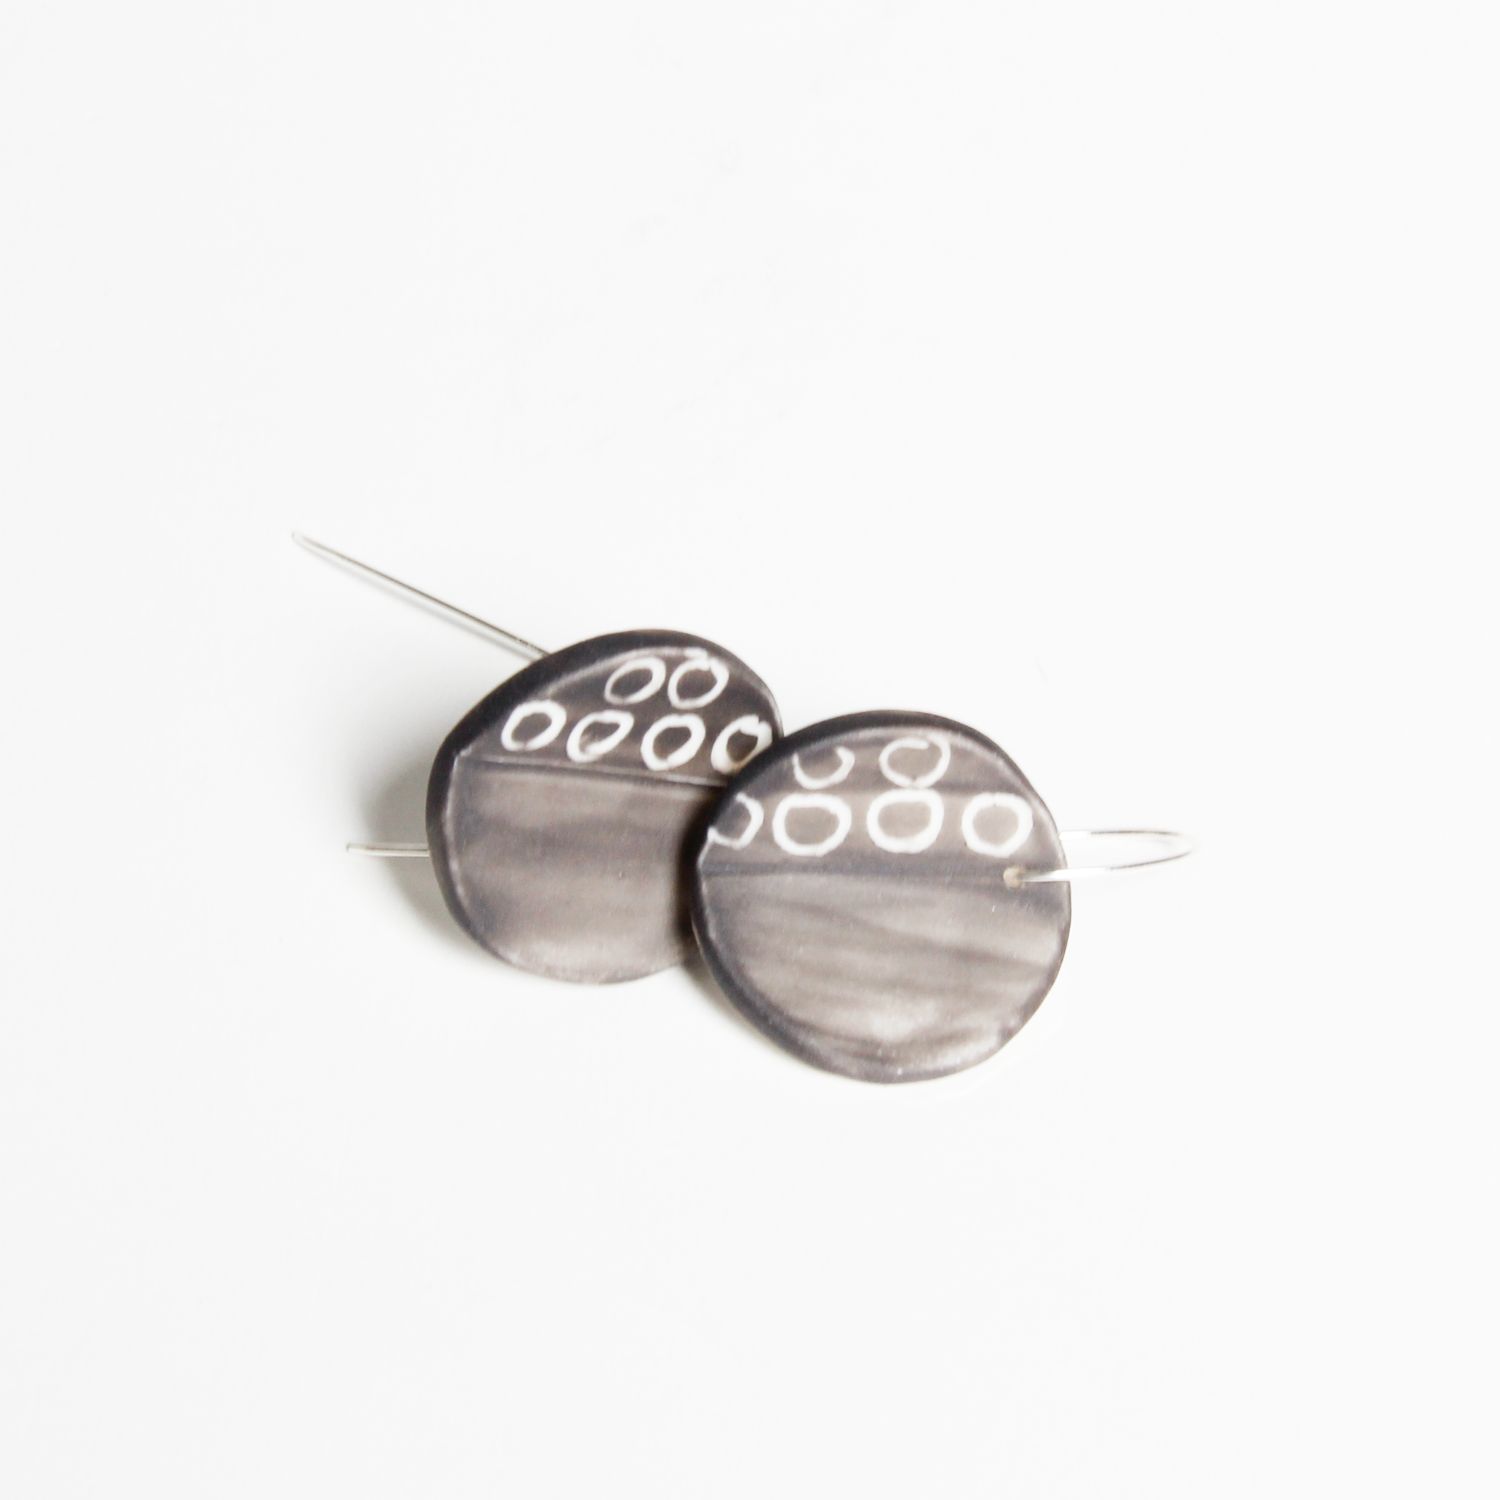 Chayle Jewellery: Eucalyptus Porcelain Earrings Black Wash Silver Product Image 3 of 4